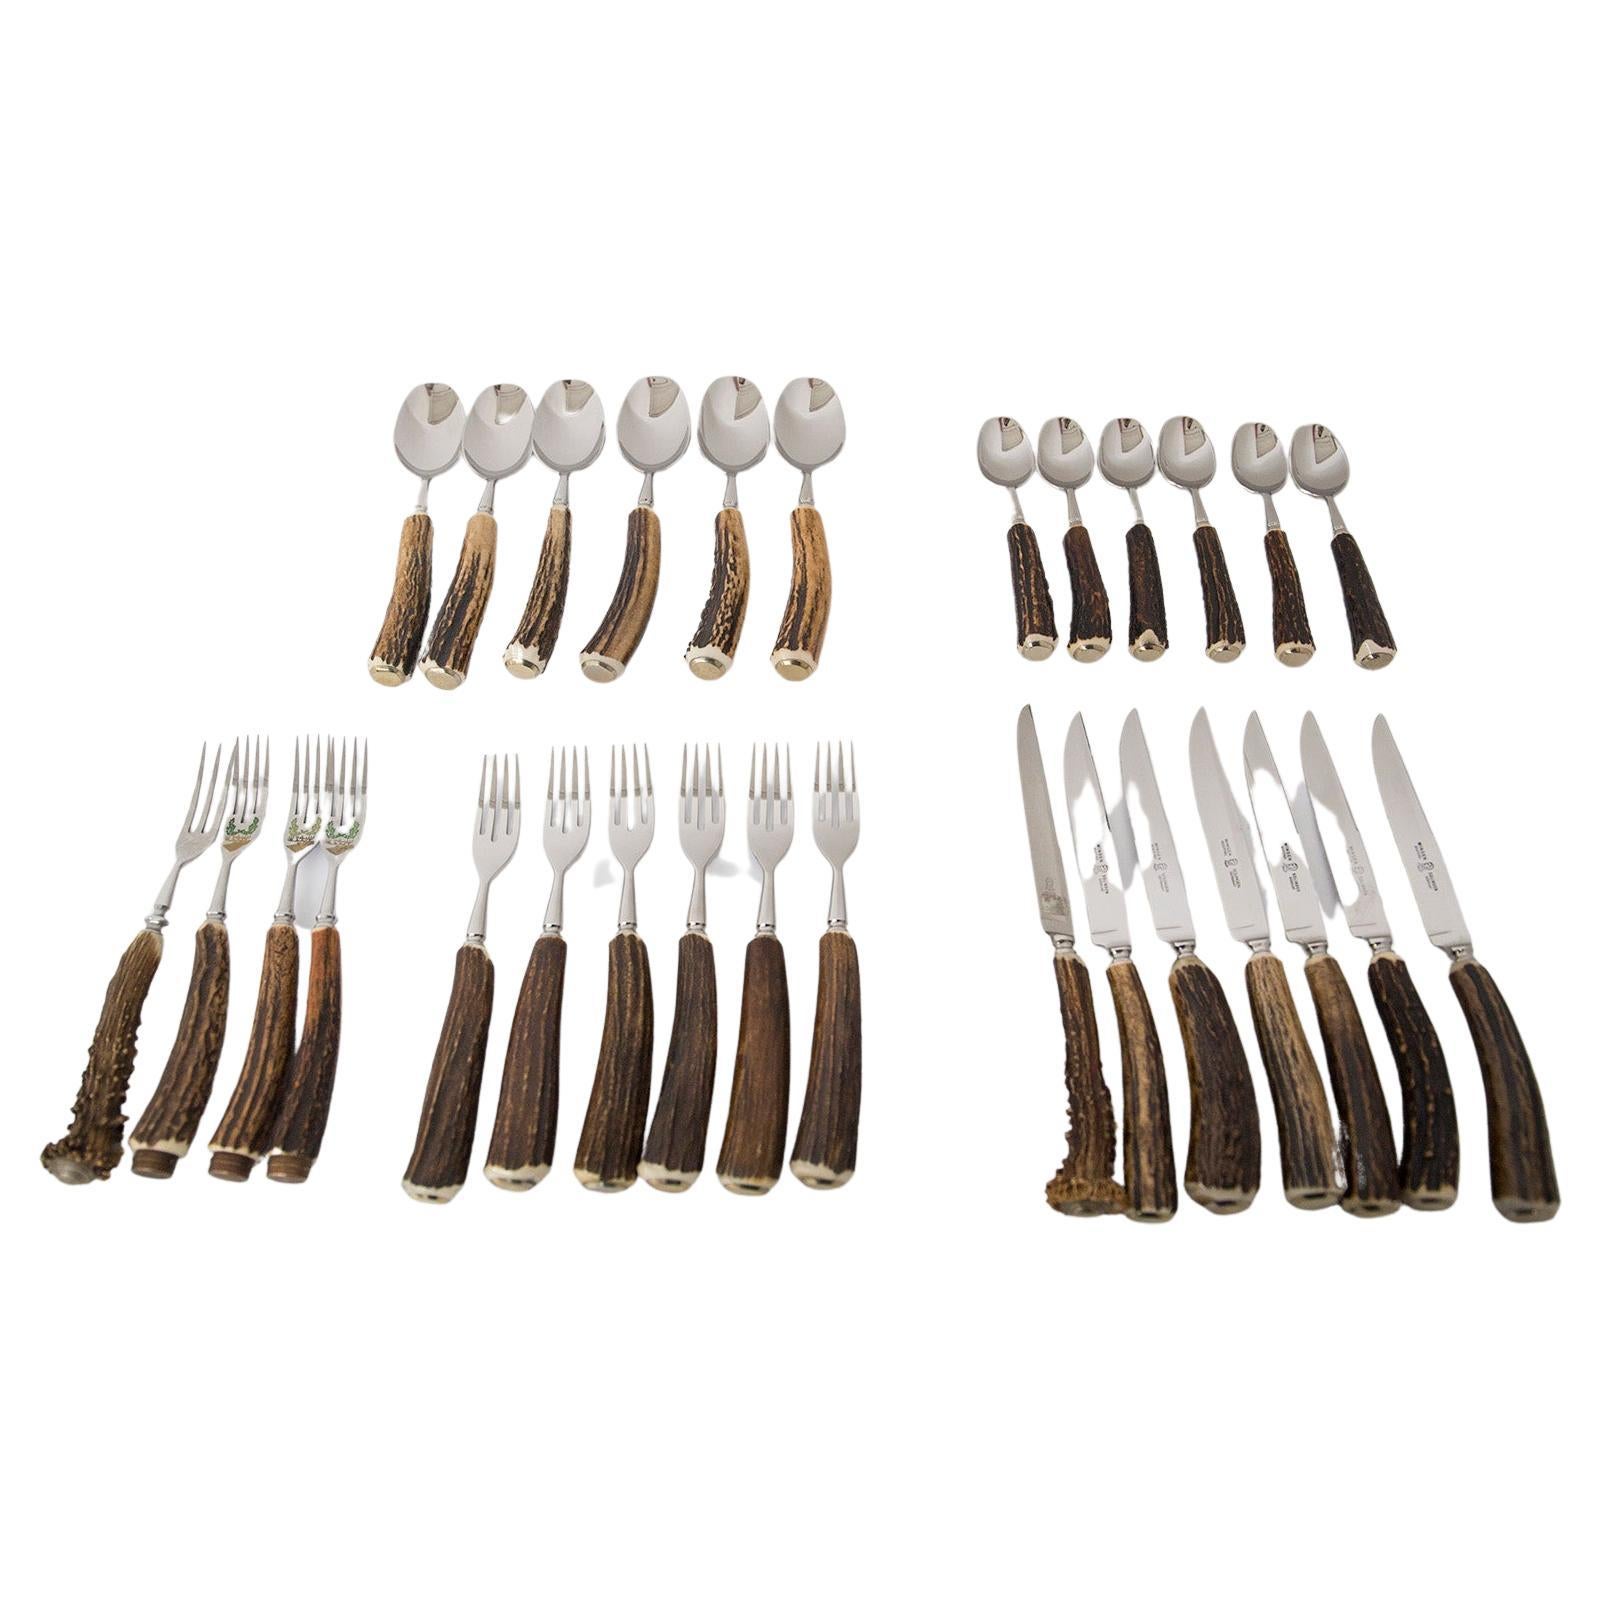 Magnificent and eccentric set of cutlery made by German manufacturer Wingen Solingen from the 1970s. The set is from the famous OTHELLO series, where it is also noted by its mark on the knives. The set was then offered for sale by the prestigious